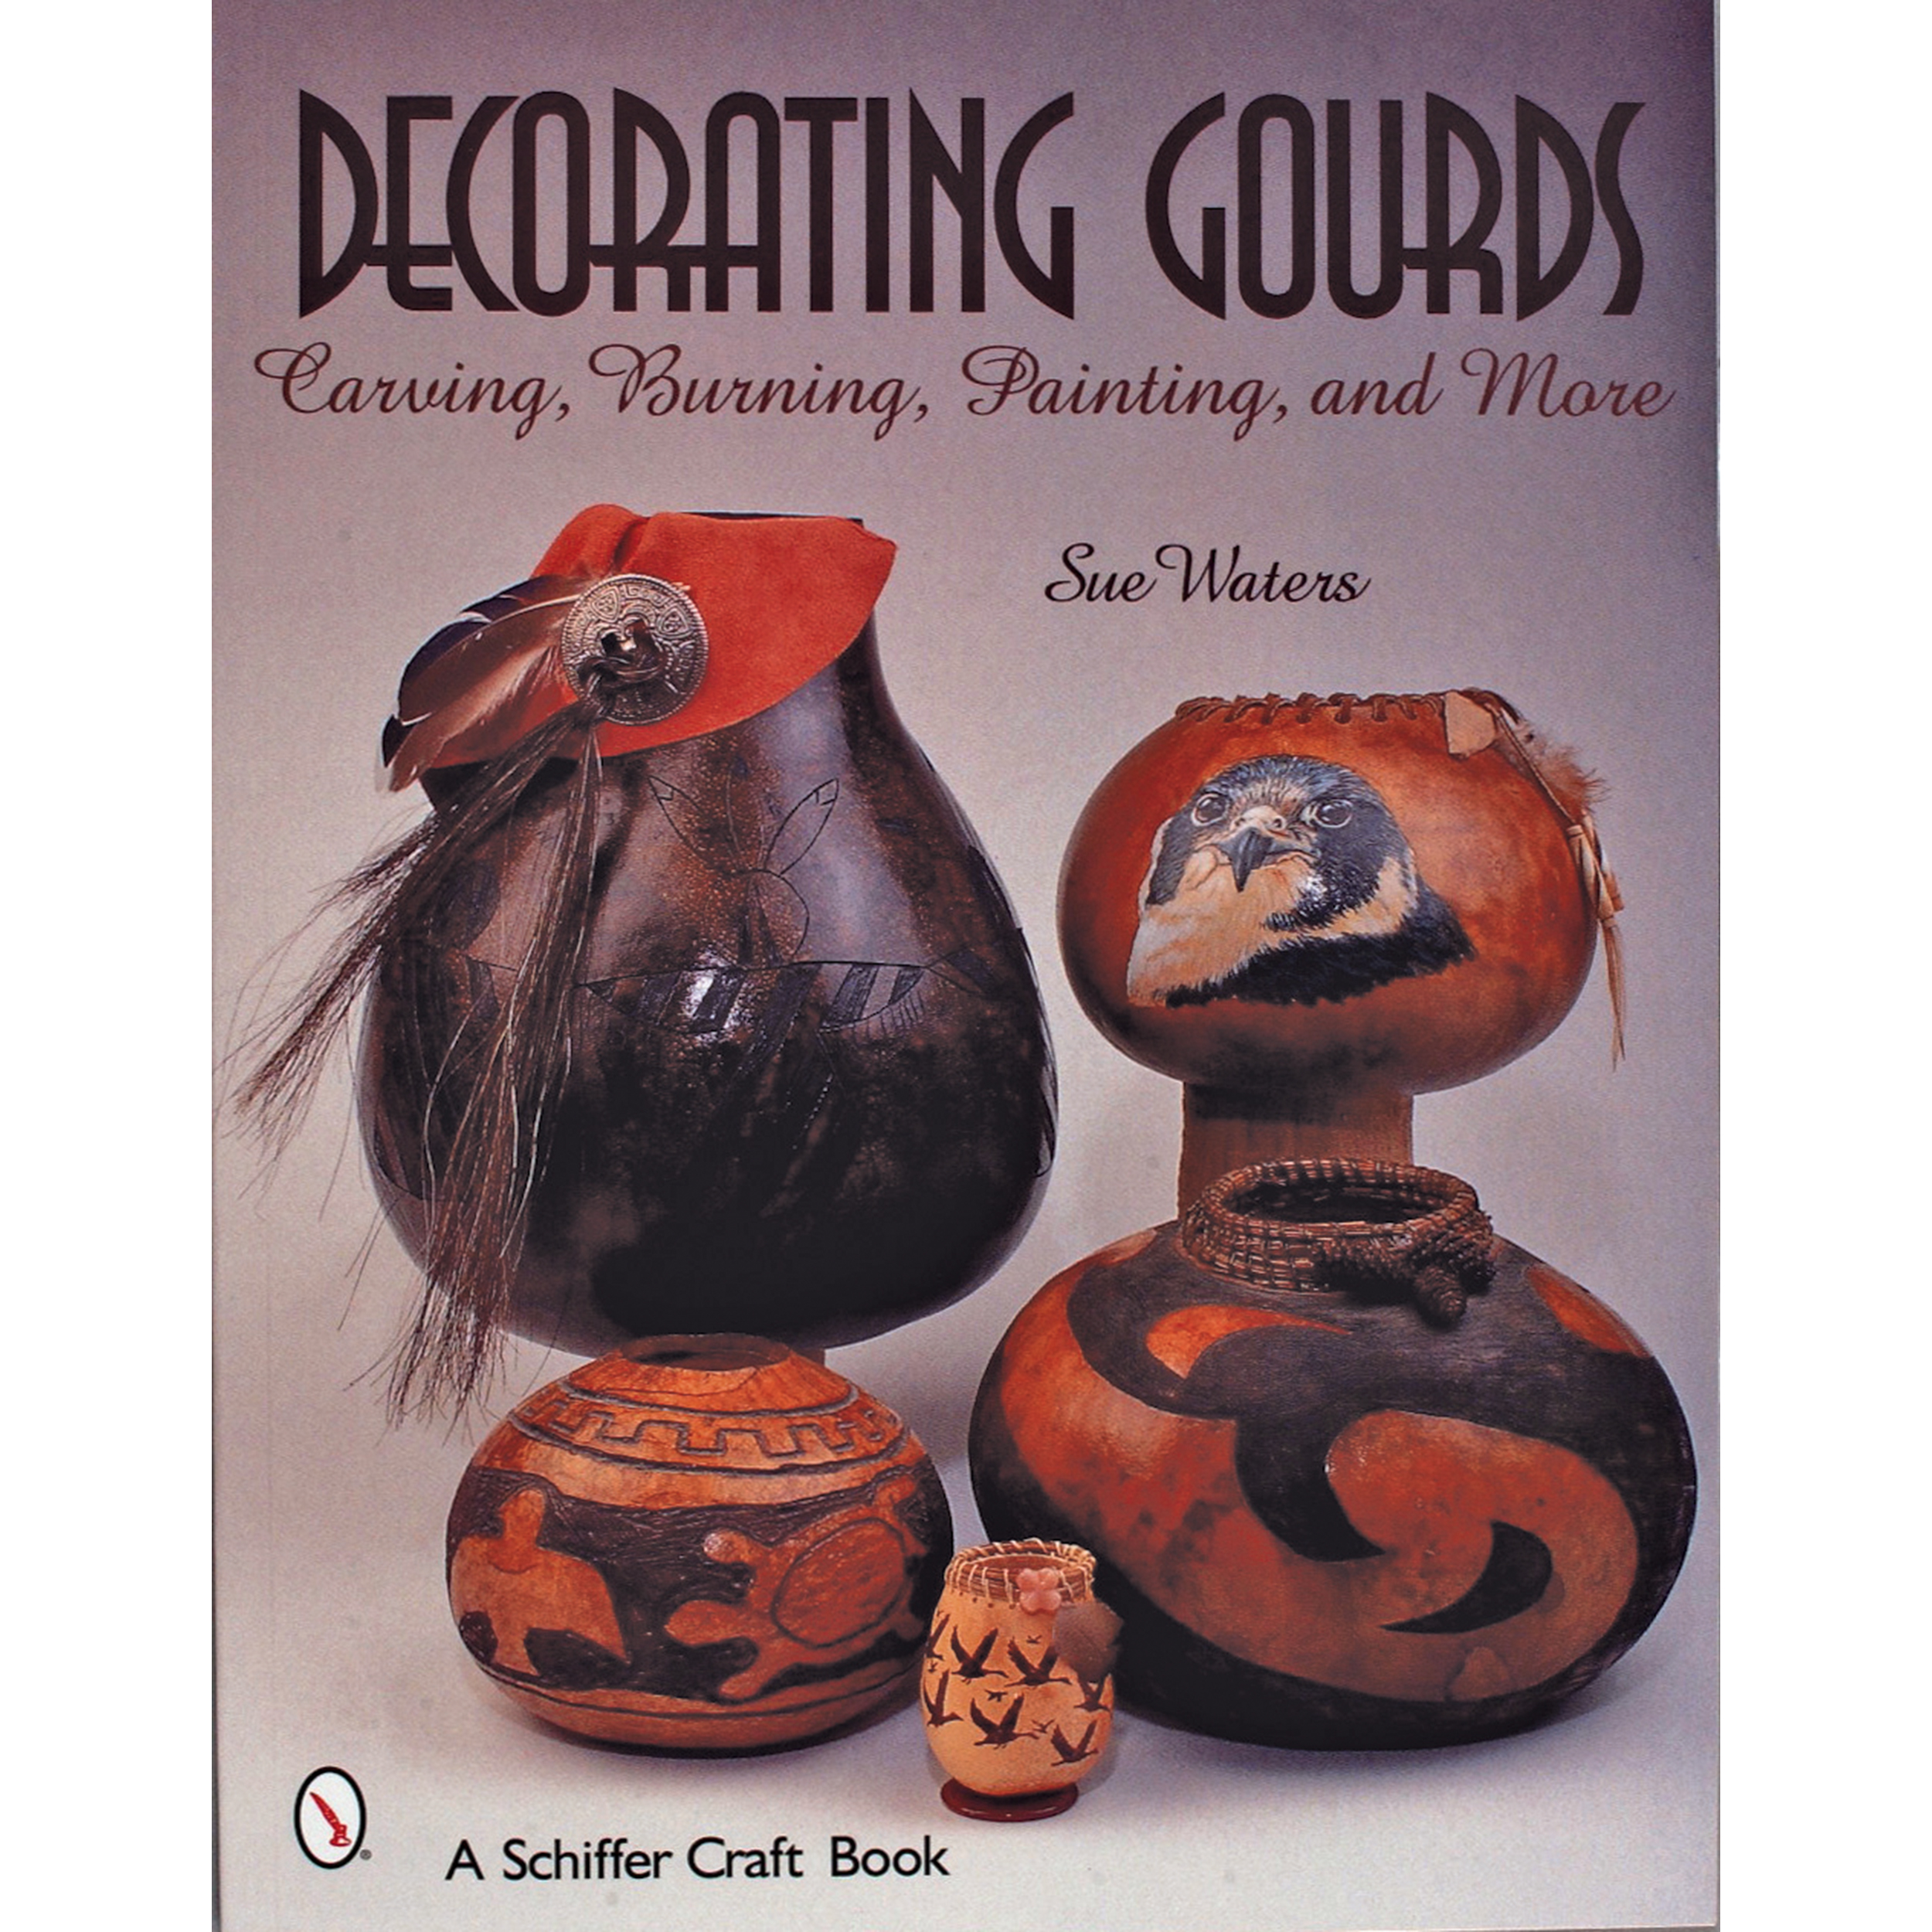 Decorating Gourds: Carving, Burning, Painting, And More